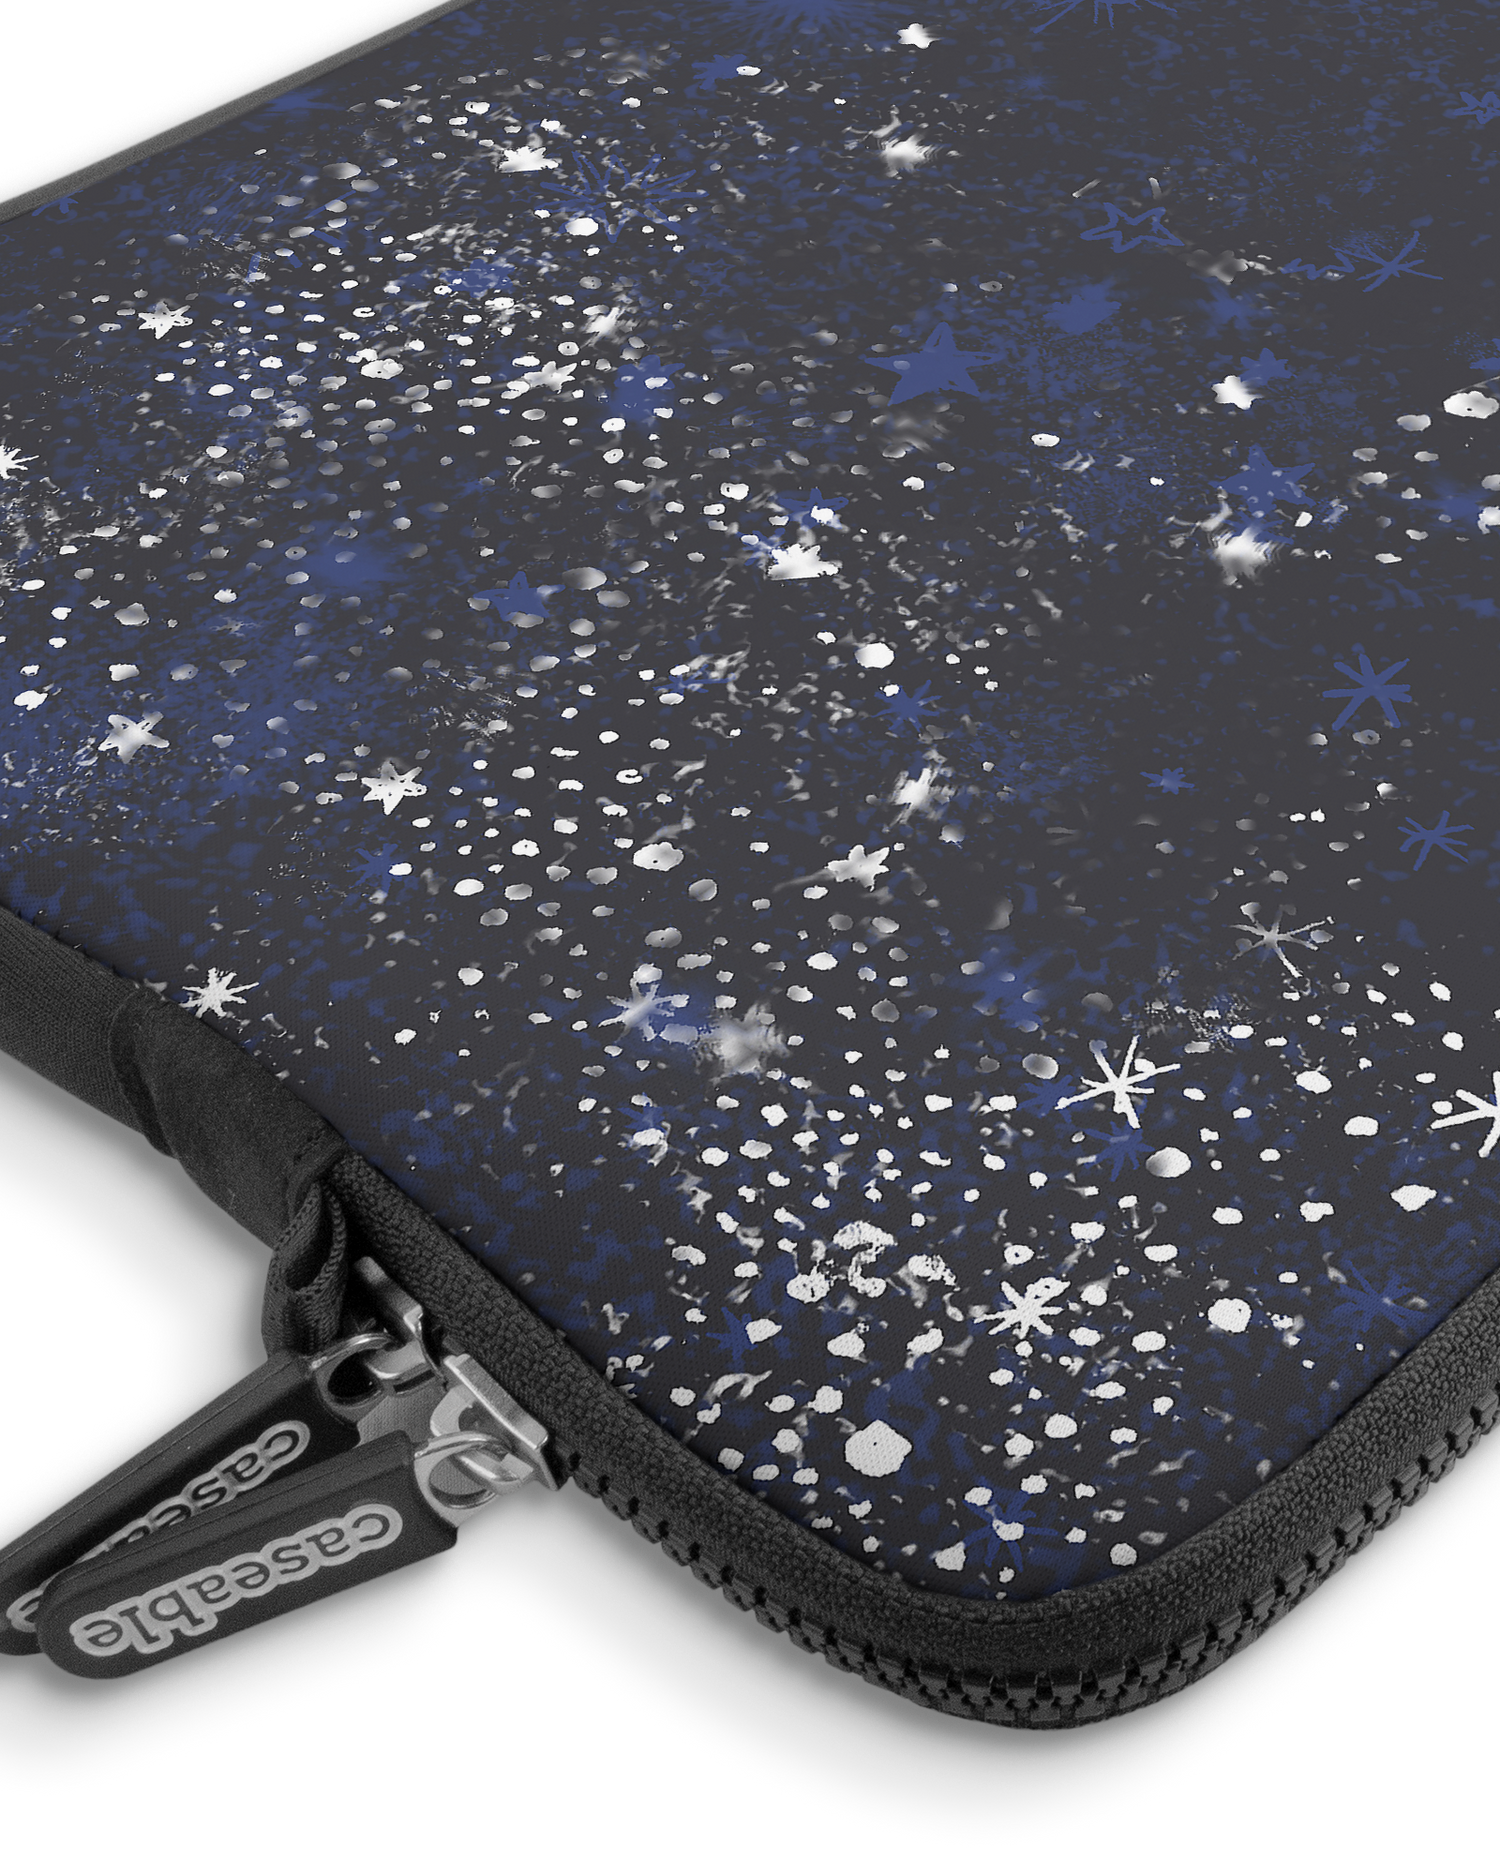 Starry Night Sky Premium Laptop Bag 13-14 inch with device inside